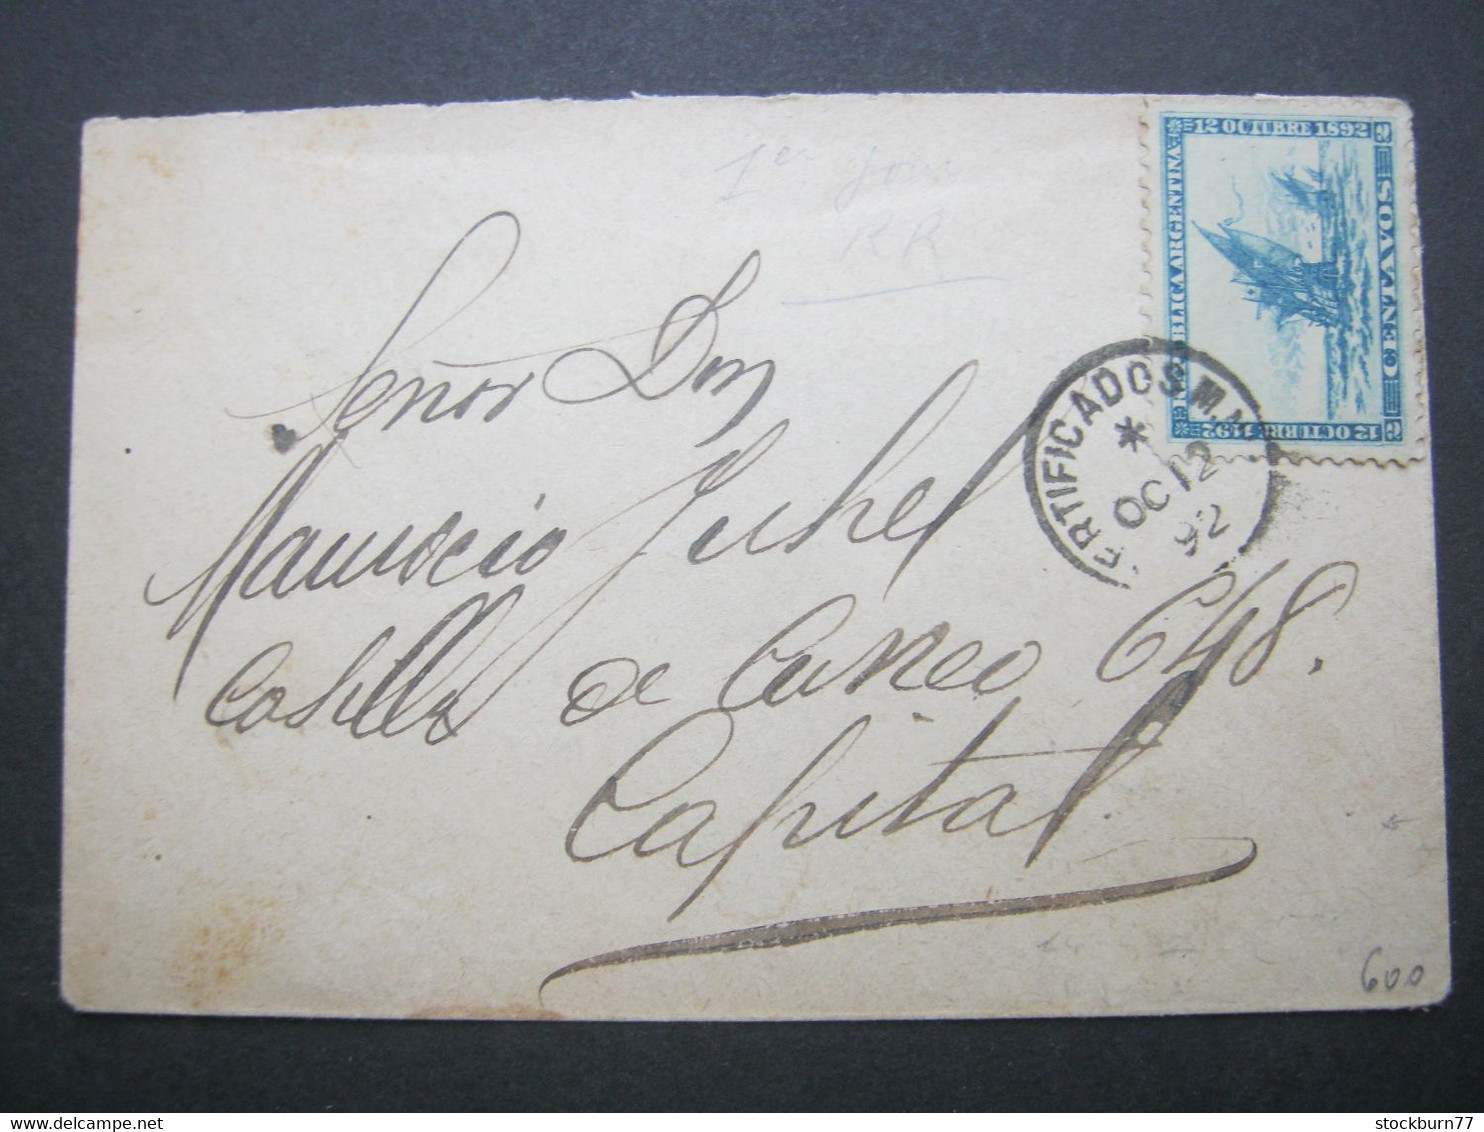 ARGENTINIEN , 1892 , 2 Centavos Auf FIRST DAY COVER , Date : 12.10.1892 , Rare Cover - Covers & Documents